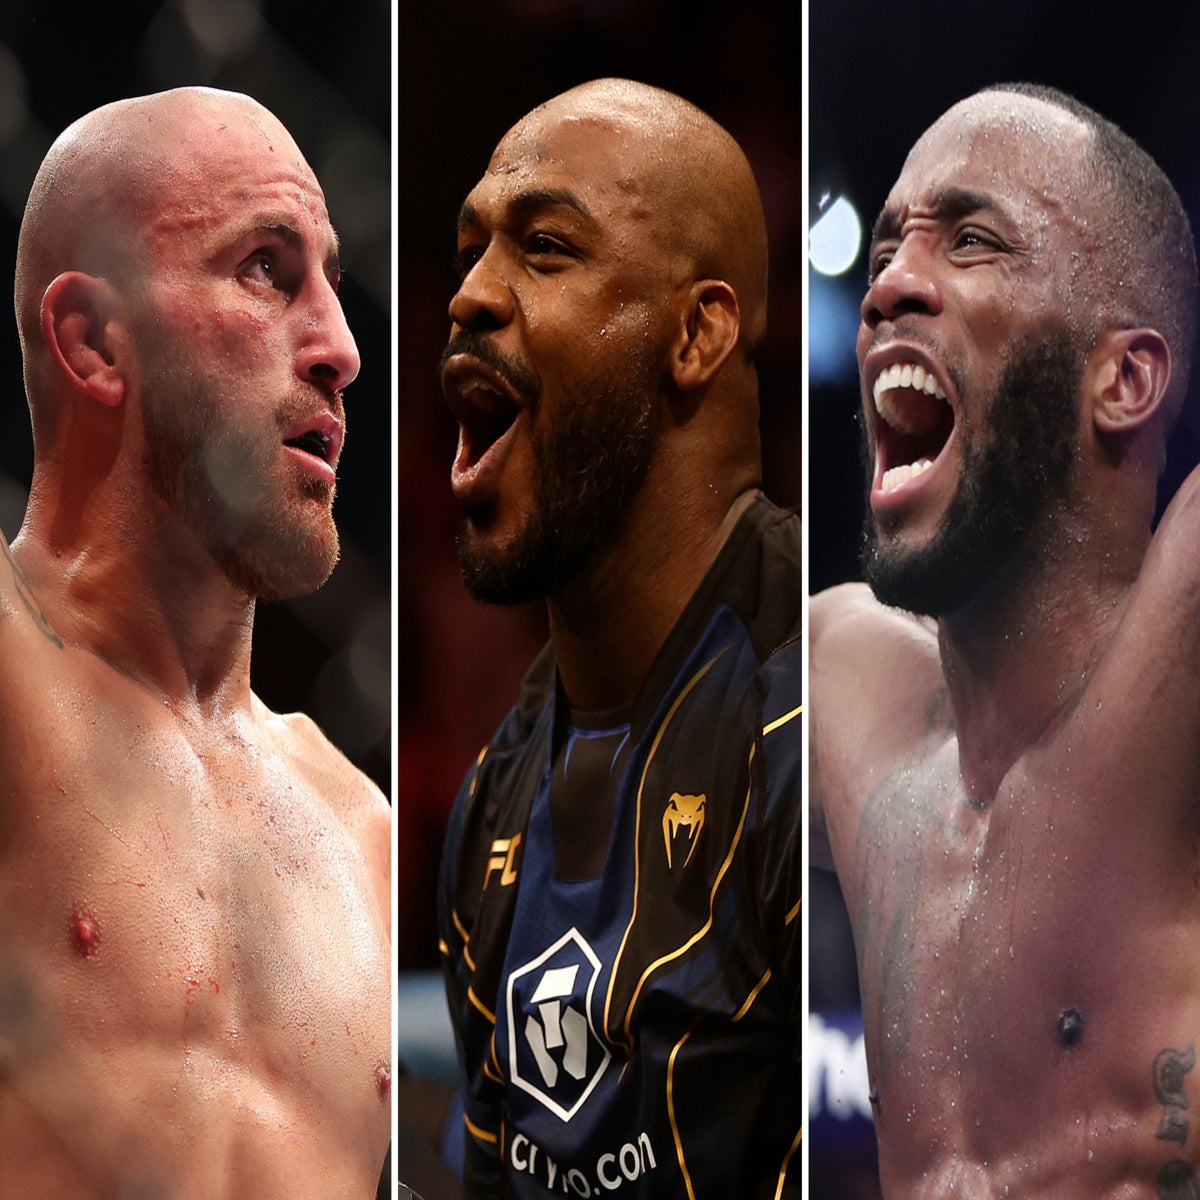 Who are the 10 best black fighters in the world currently?